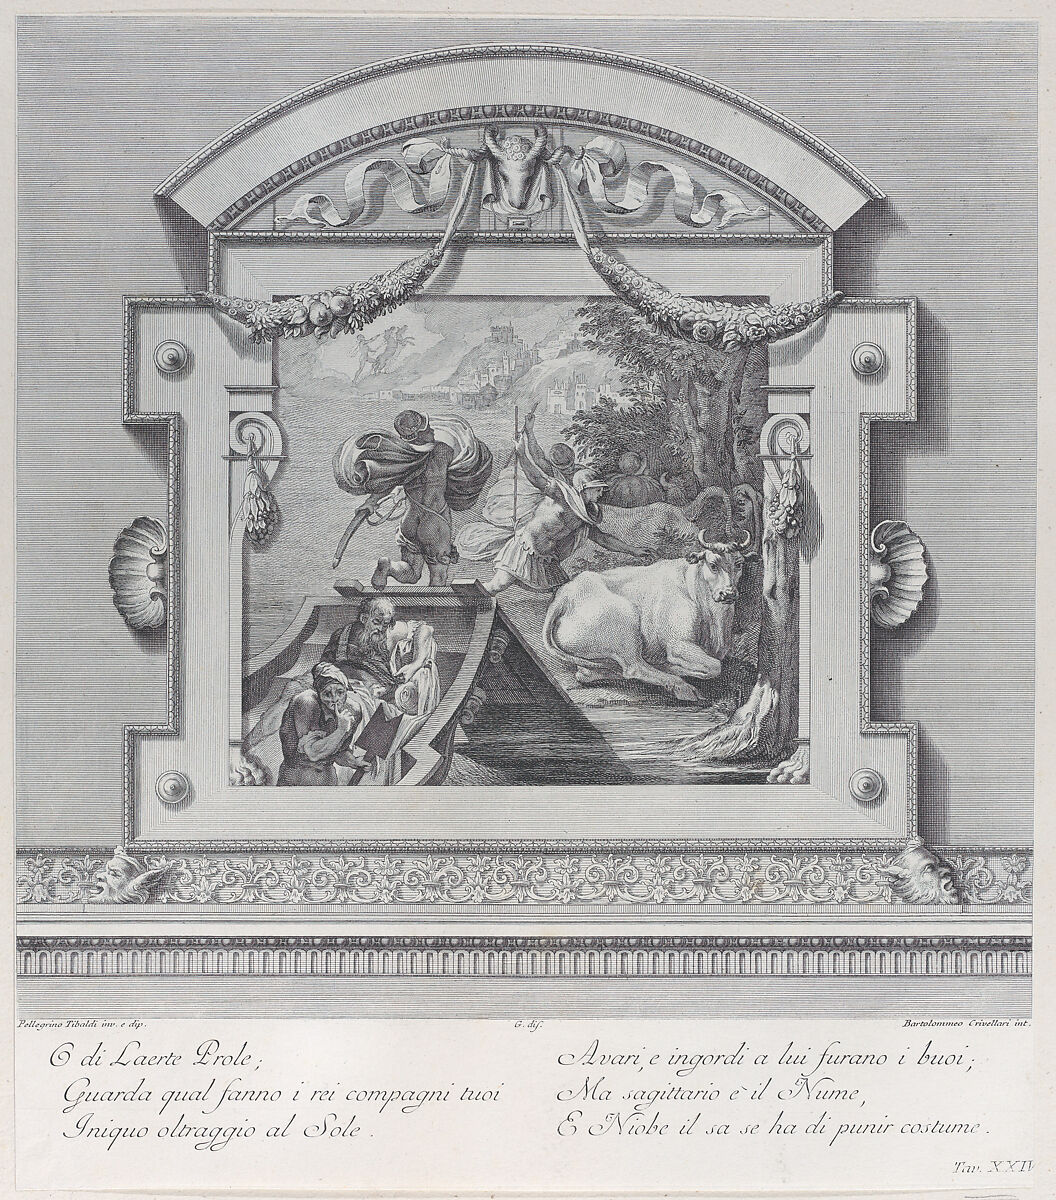 Plate 24: Ulysses's companions stealing the oxen sacred to Apollo, Bartolomeo Crivellari (Italian, active 18th century), Etching and engraving 